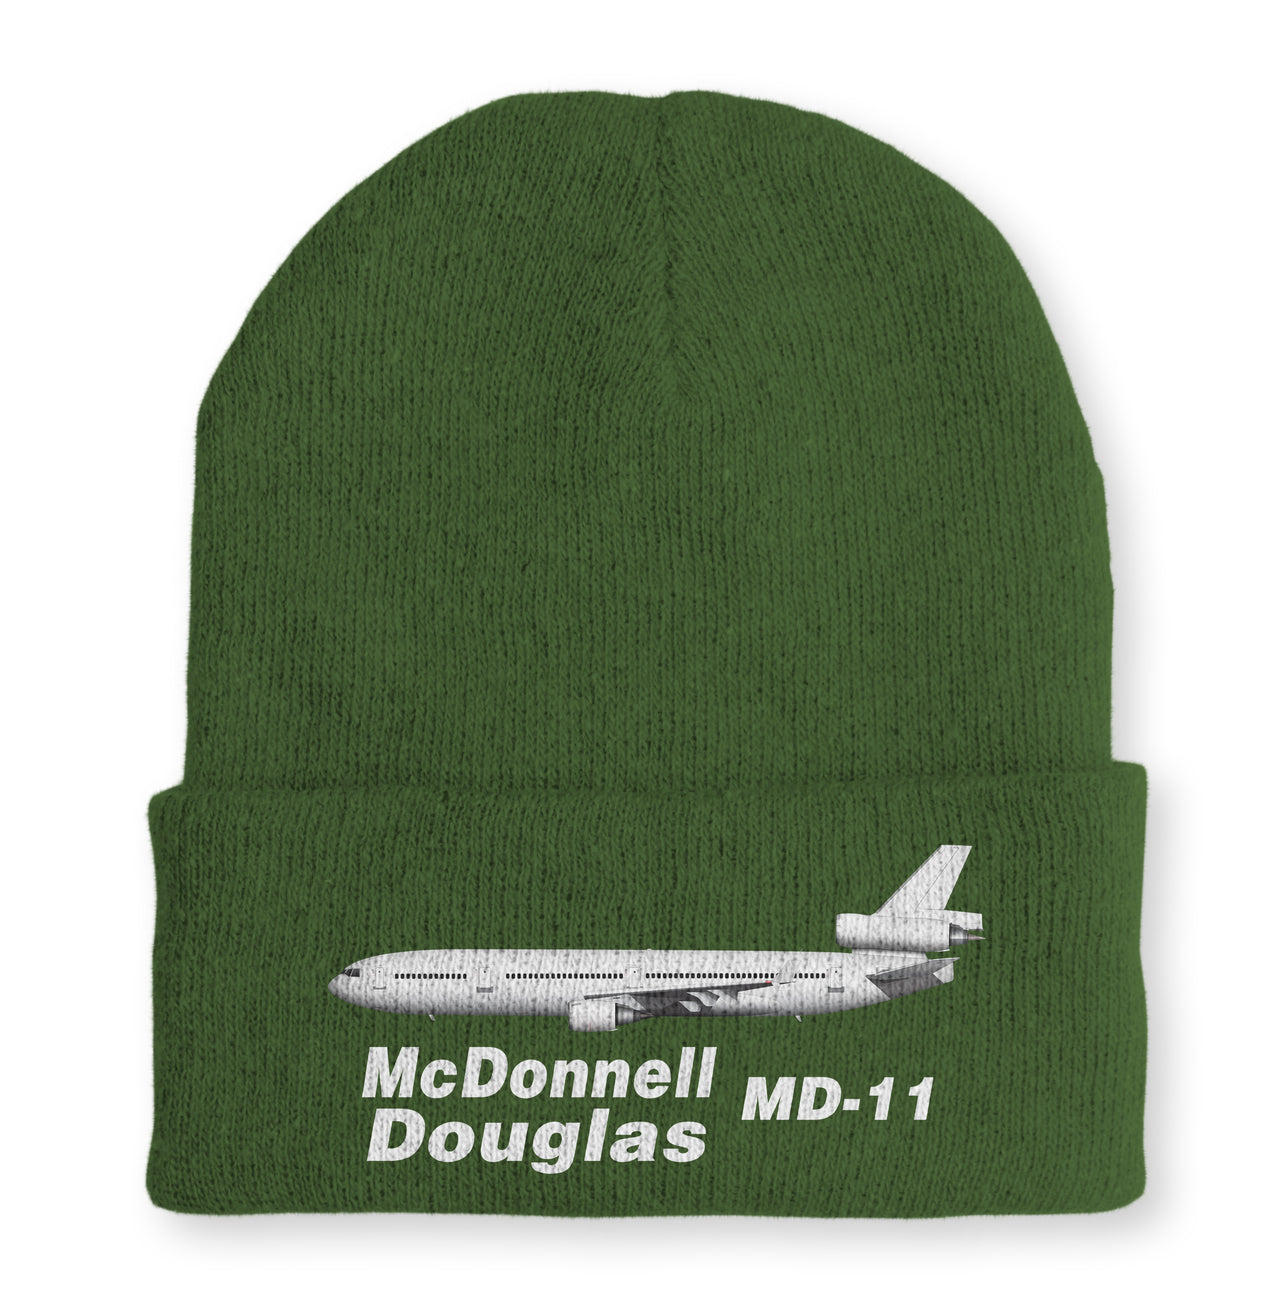 The McDonnell Douglas MD-11 Embroidered Beanies